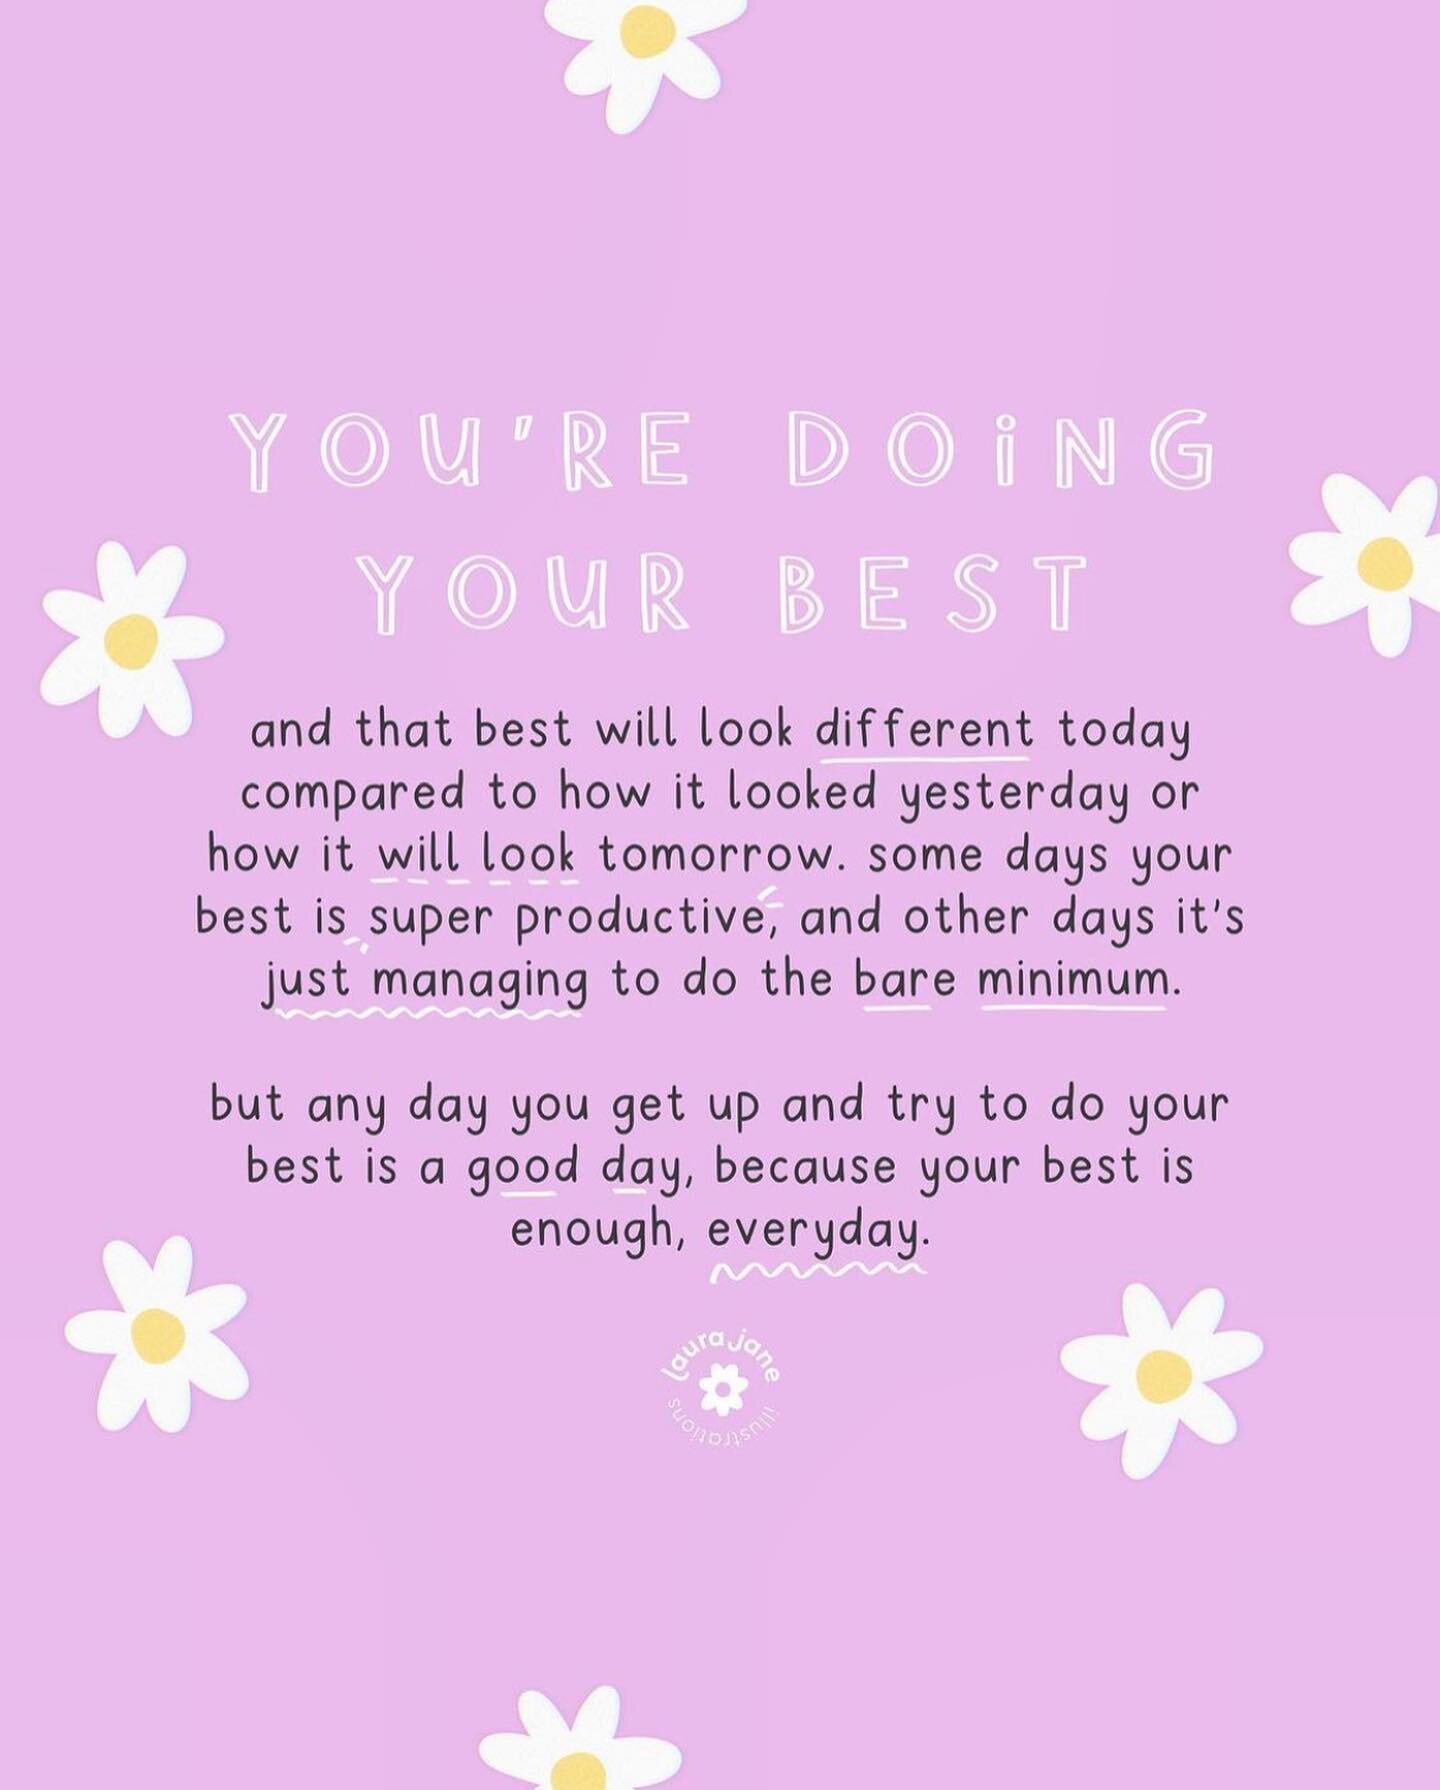 Today on #worldmentalhealthday we wanted to remind you of this very important message; your best is enough, everyday. 💜

Beautiful post by @laurajaneillustrations ✨